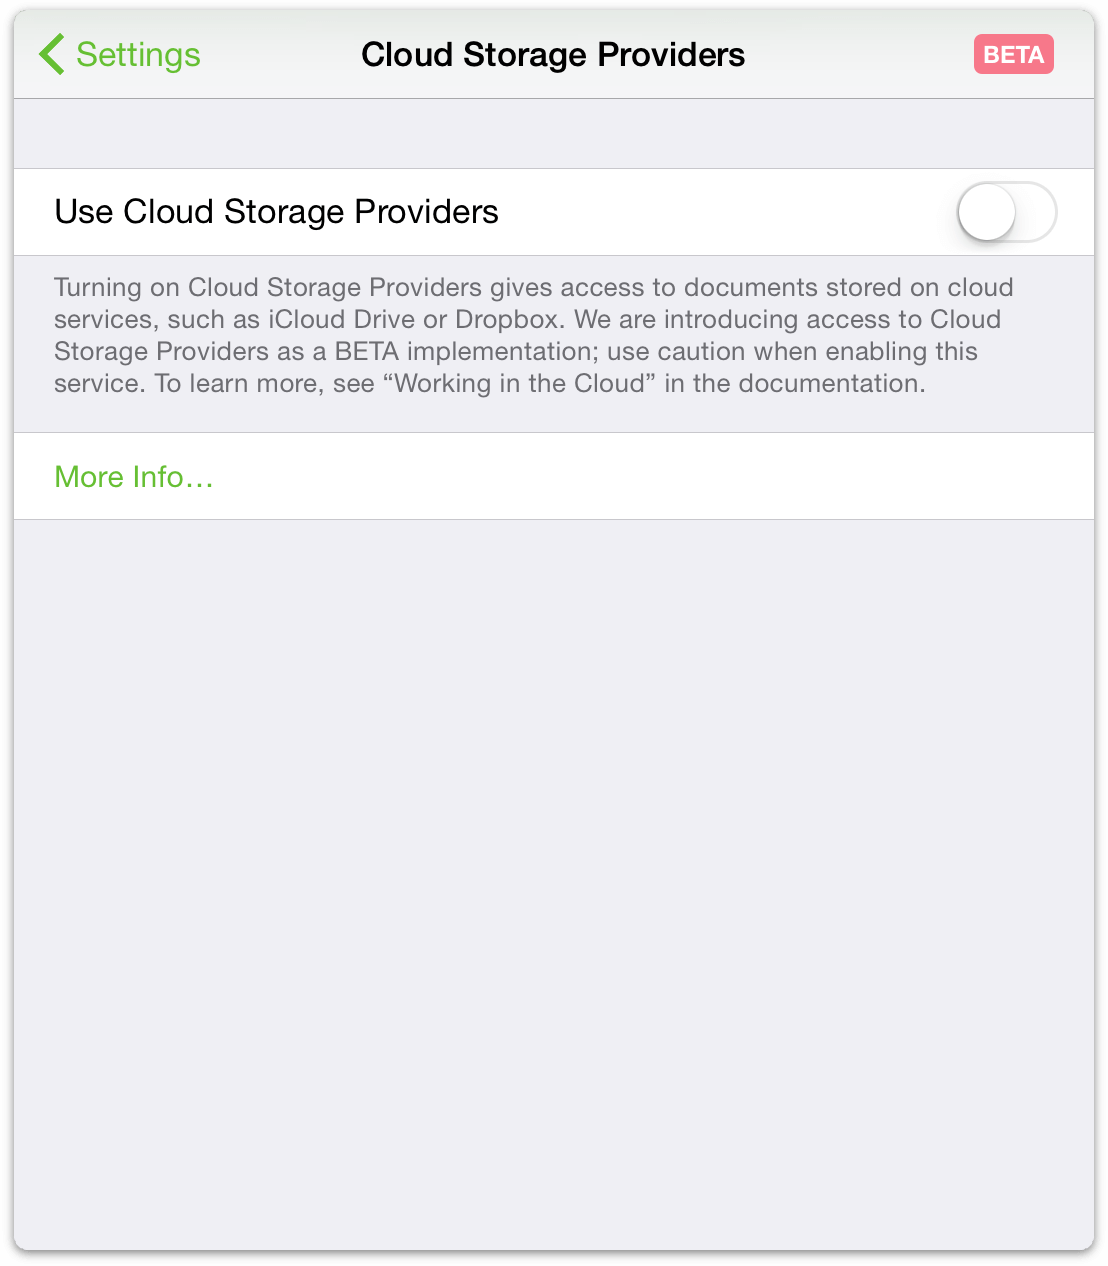 Read the text beneath the switch before turning on the Use Cloud Storage Providers option